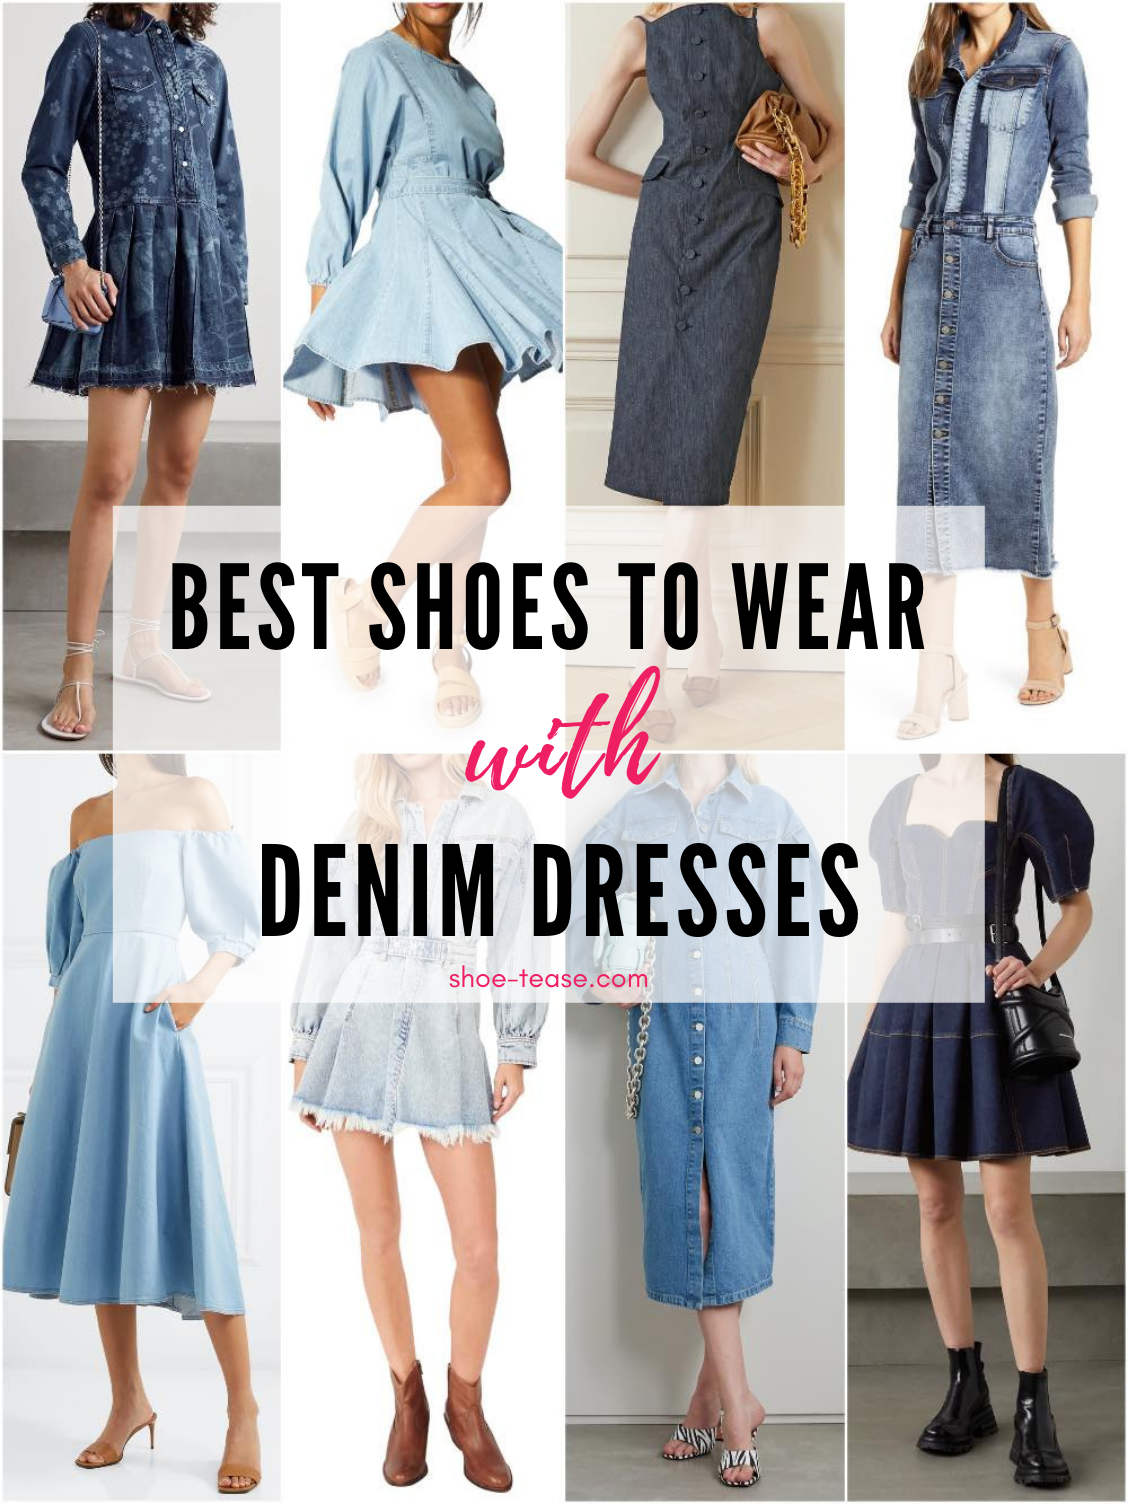 What to wear with a denim dress